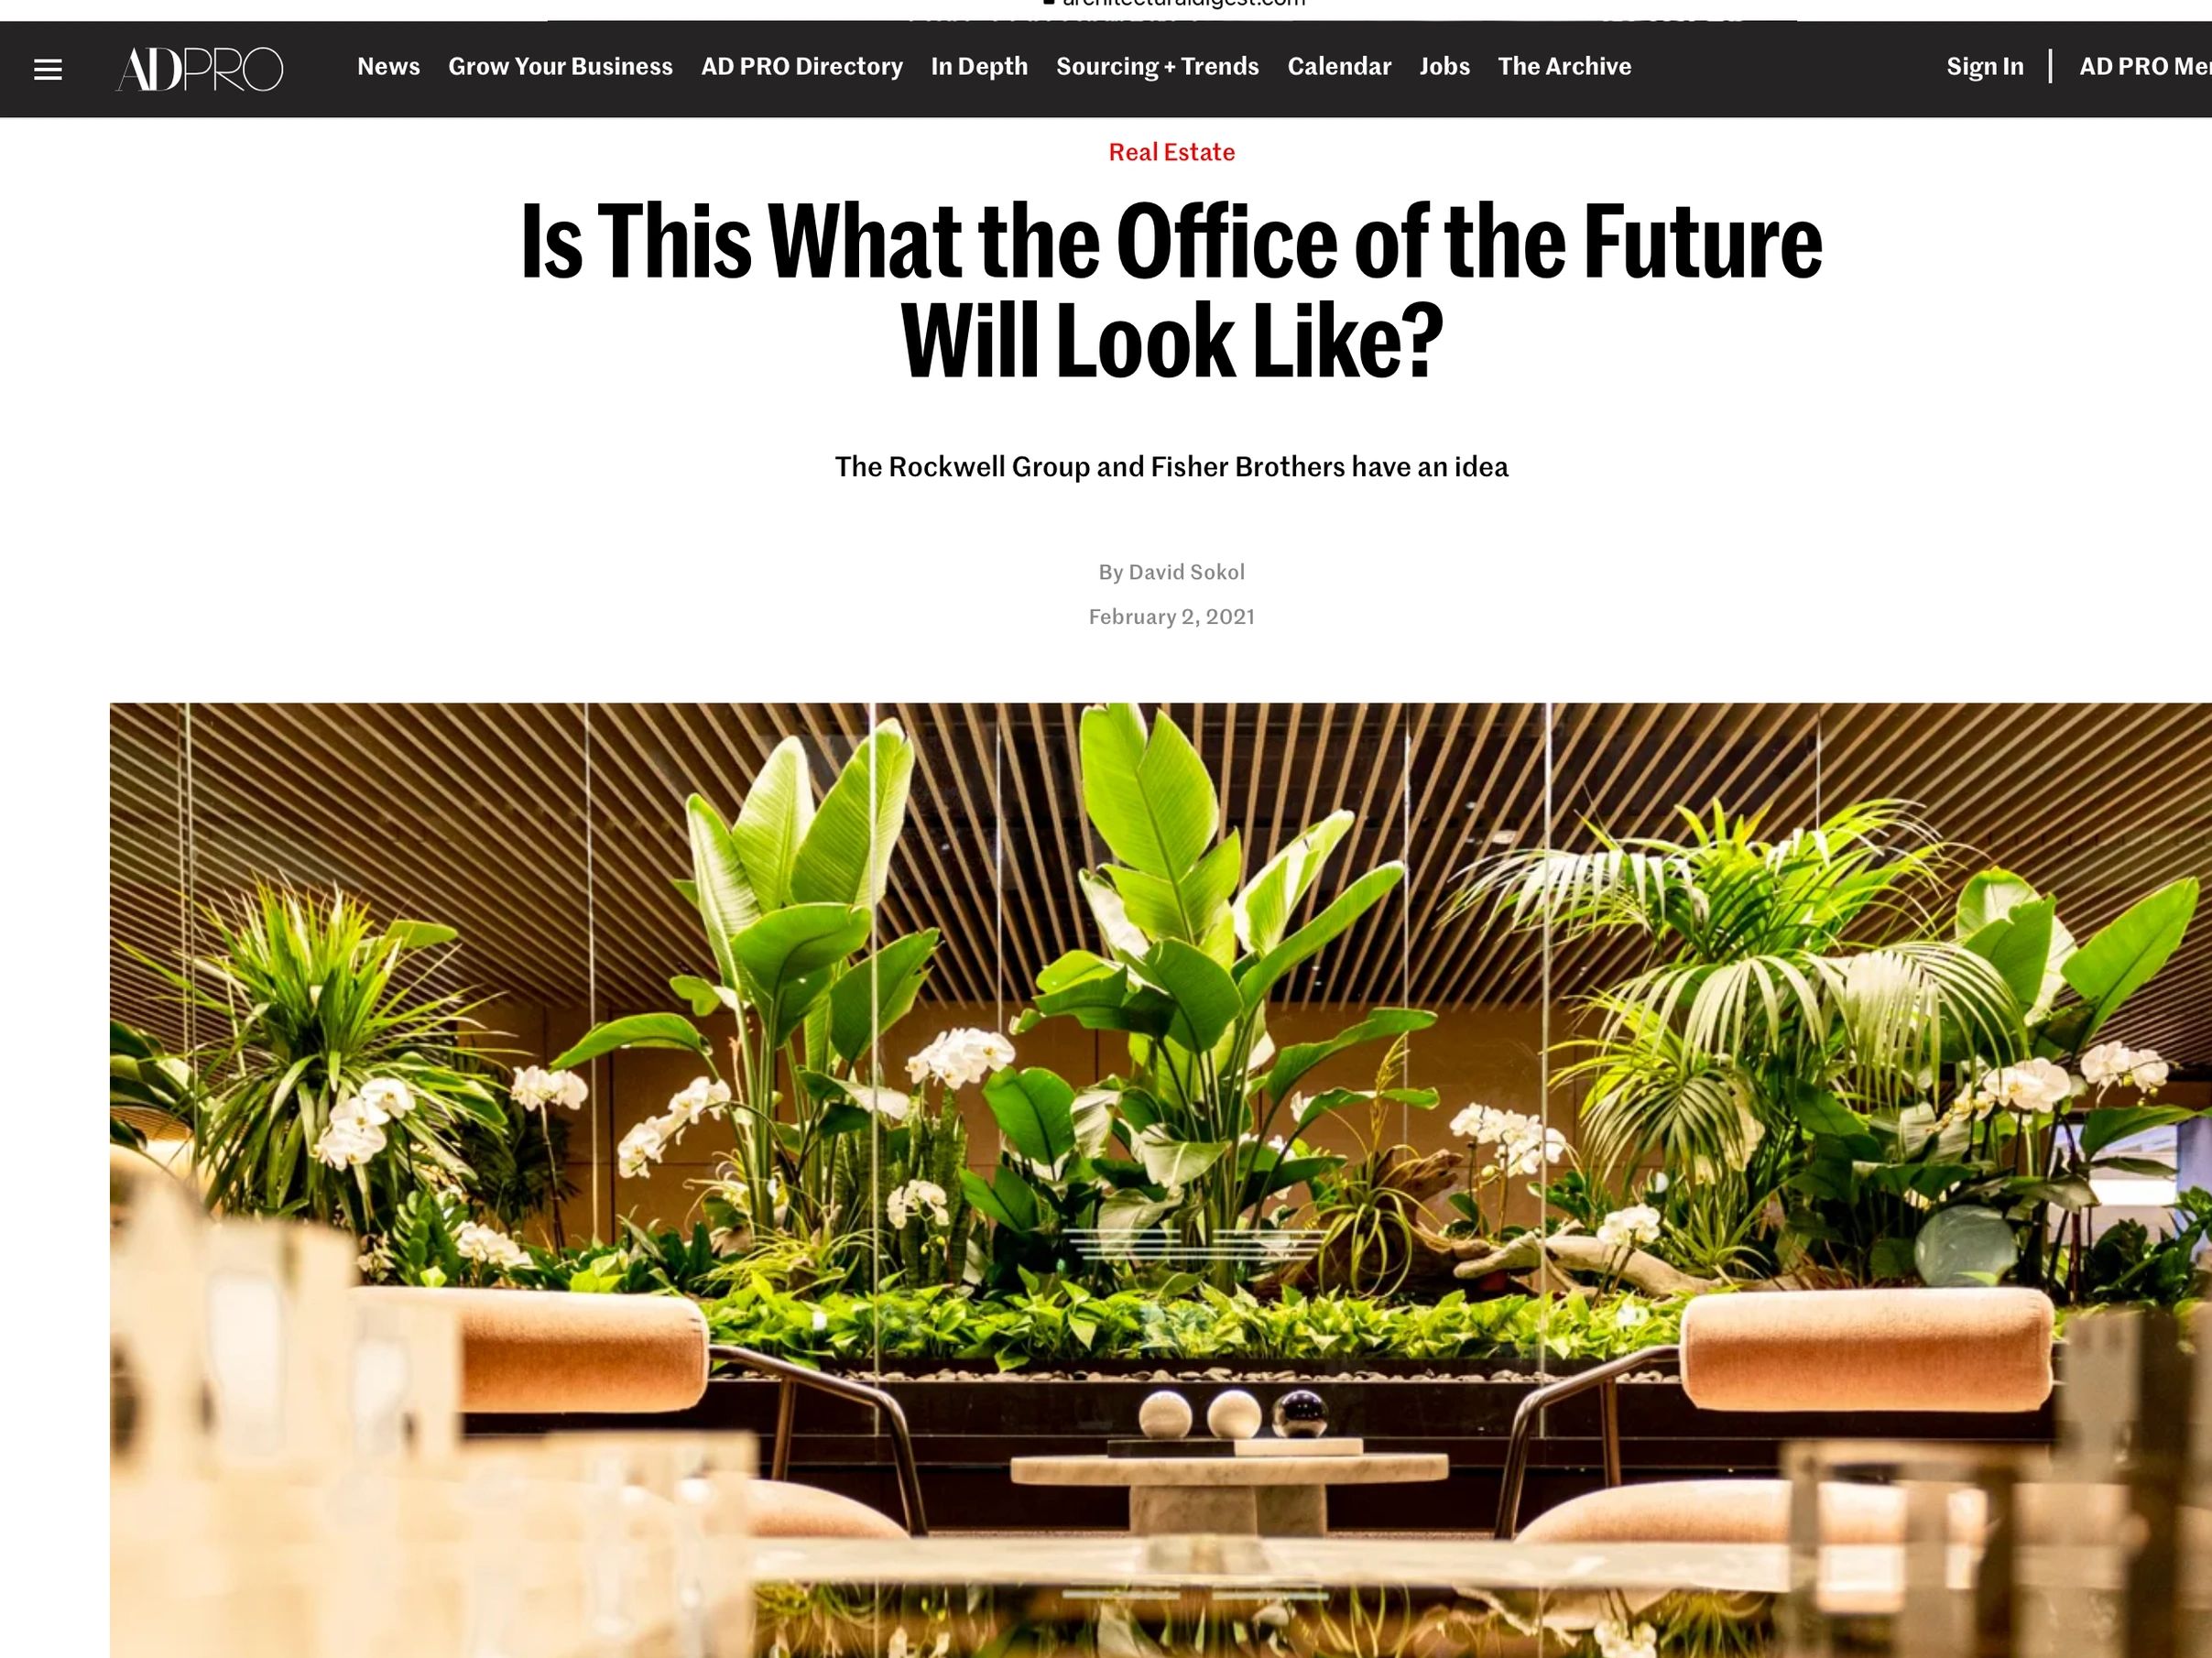 Architectural Digest and AD Pro speak with Crystal Fisher about the future of office 2/2/21 